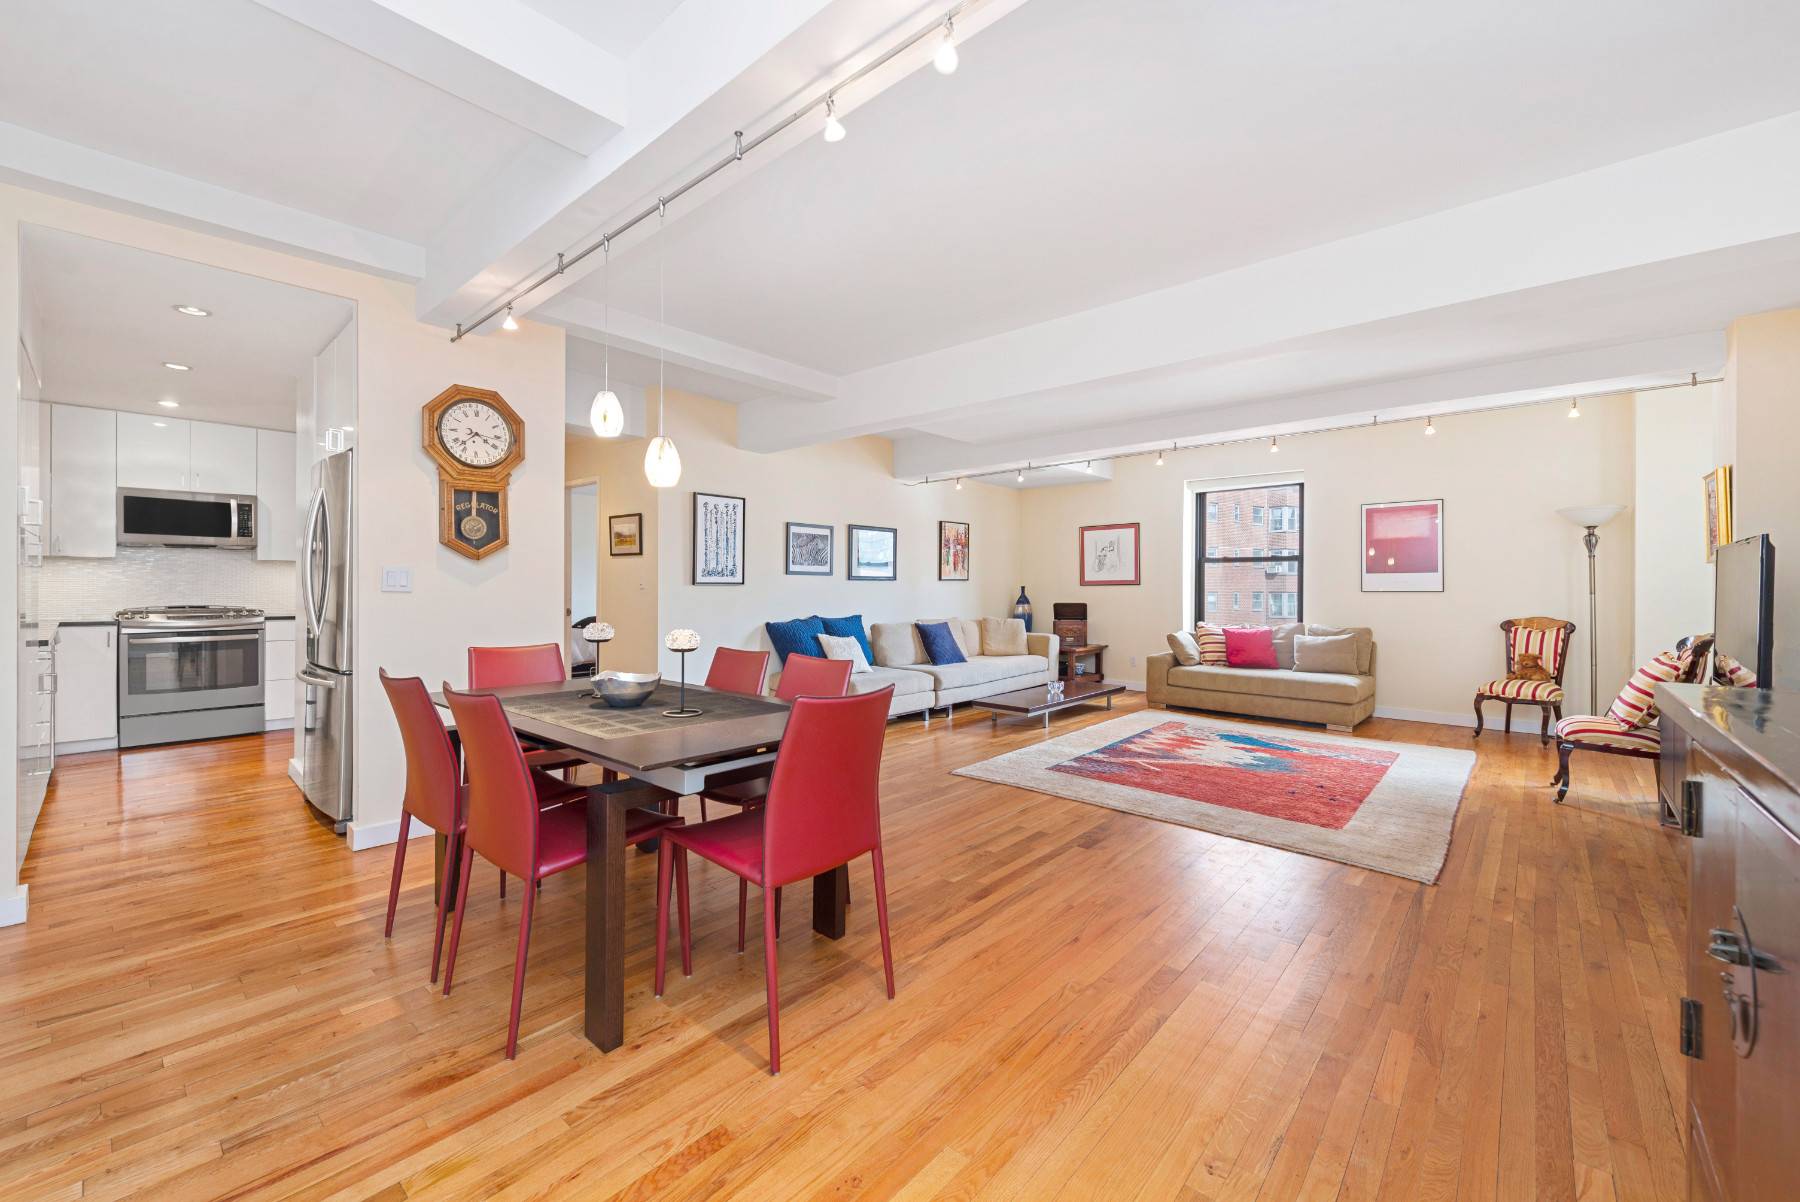 BEAUTIFUL CONVERTIBLE 2BR Fabulous loft like apartment in prime Chelsea territory presently configured as a stunning oversized one bedroom !